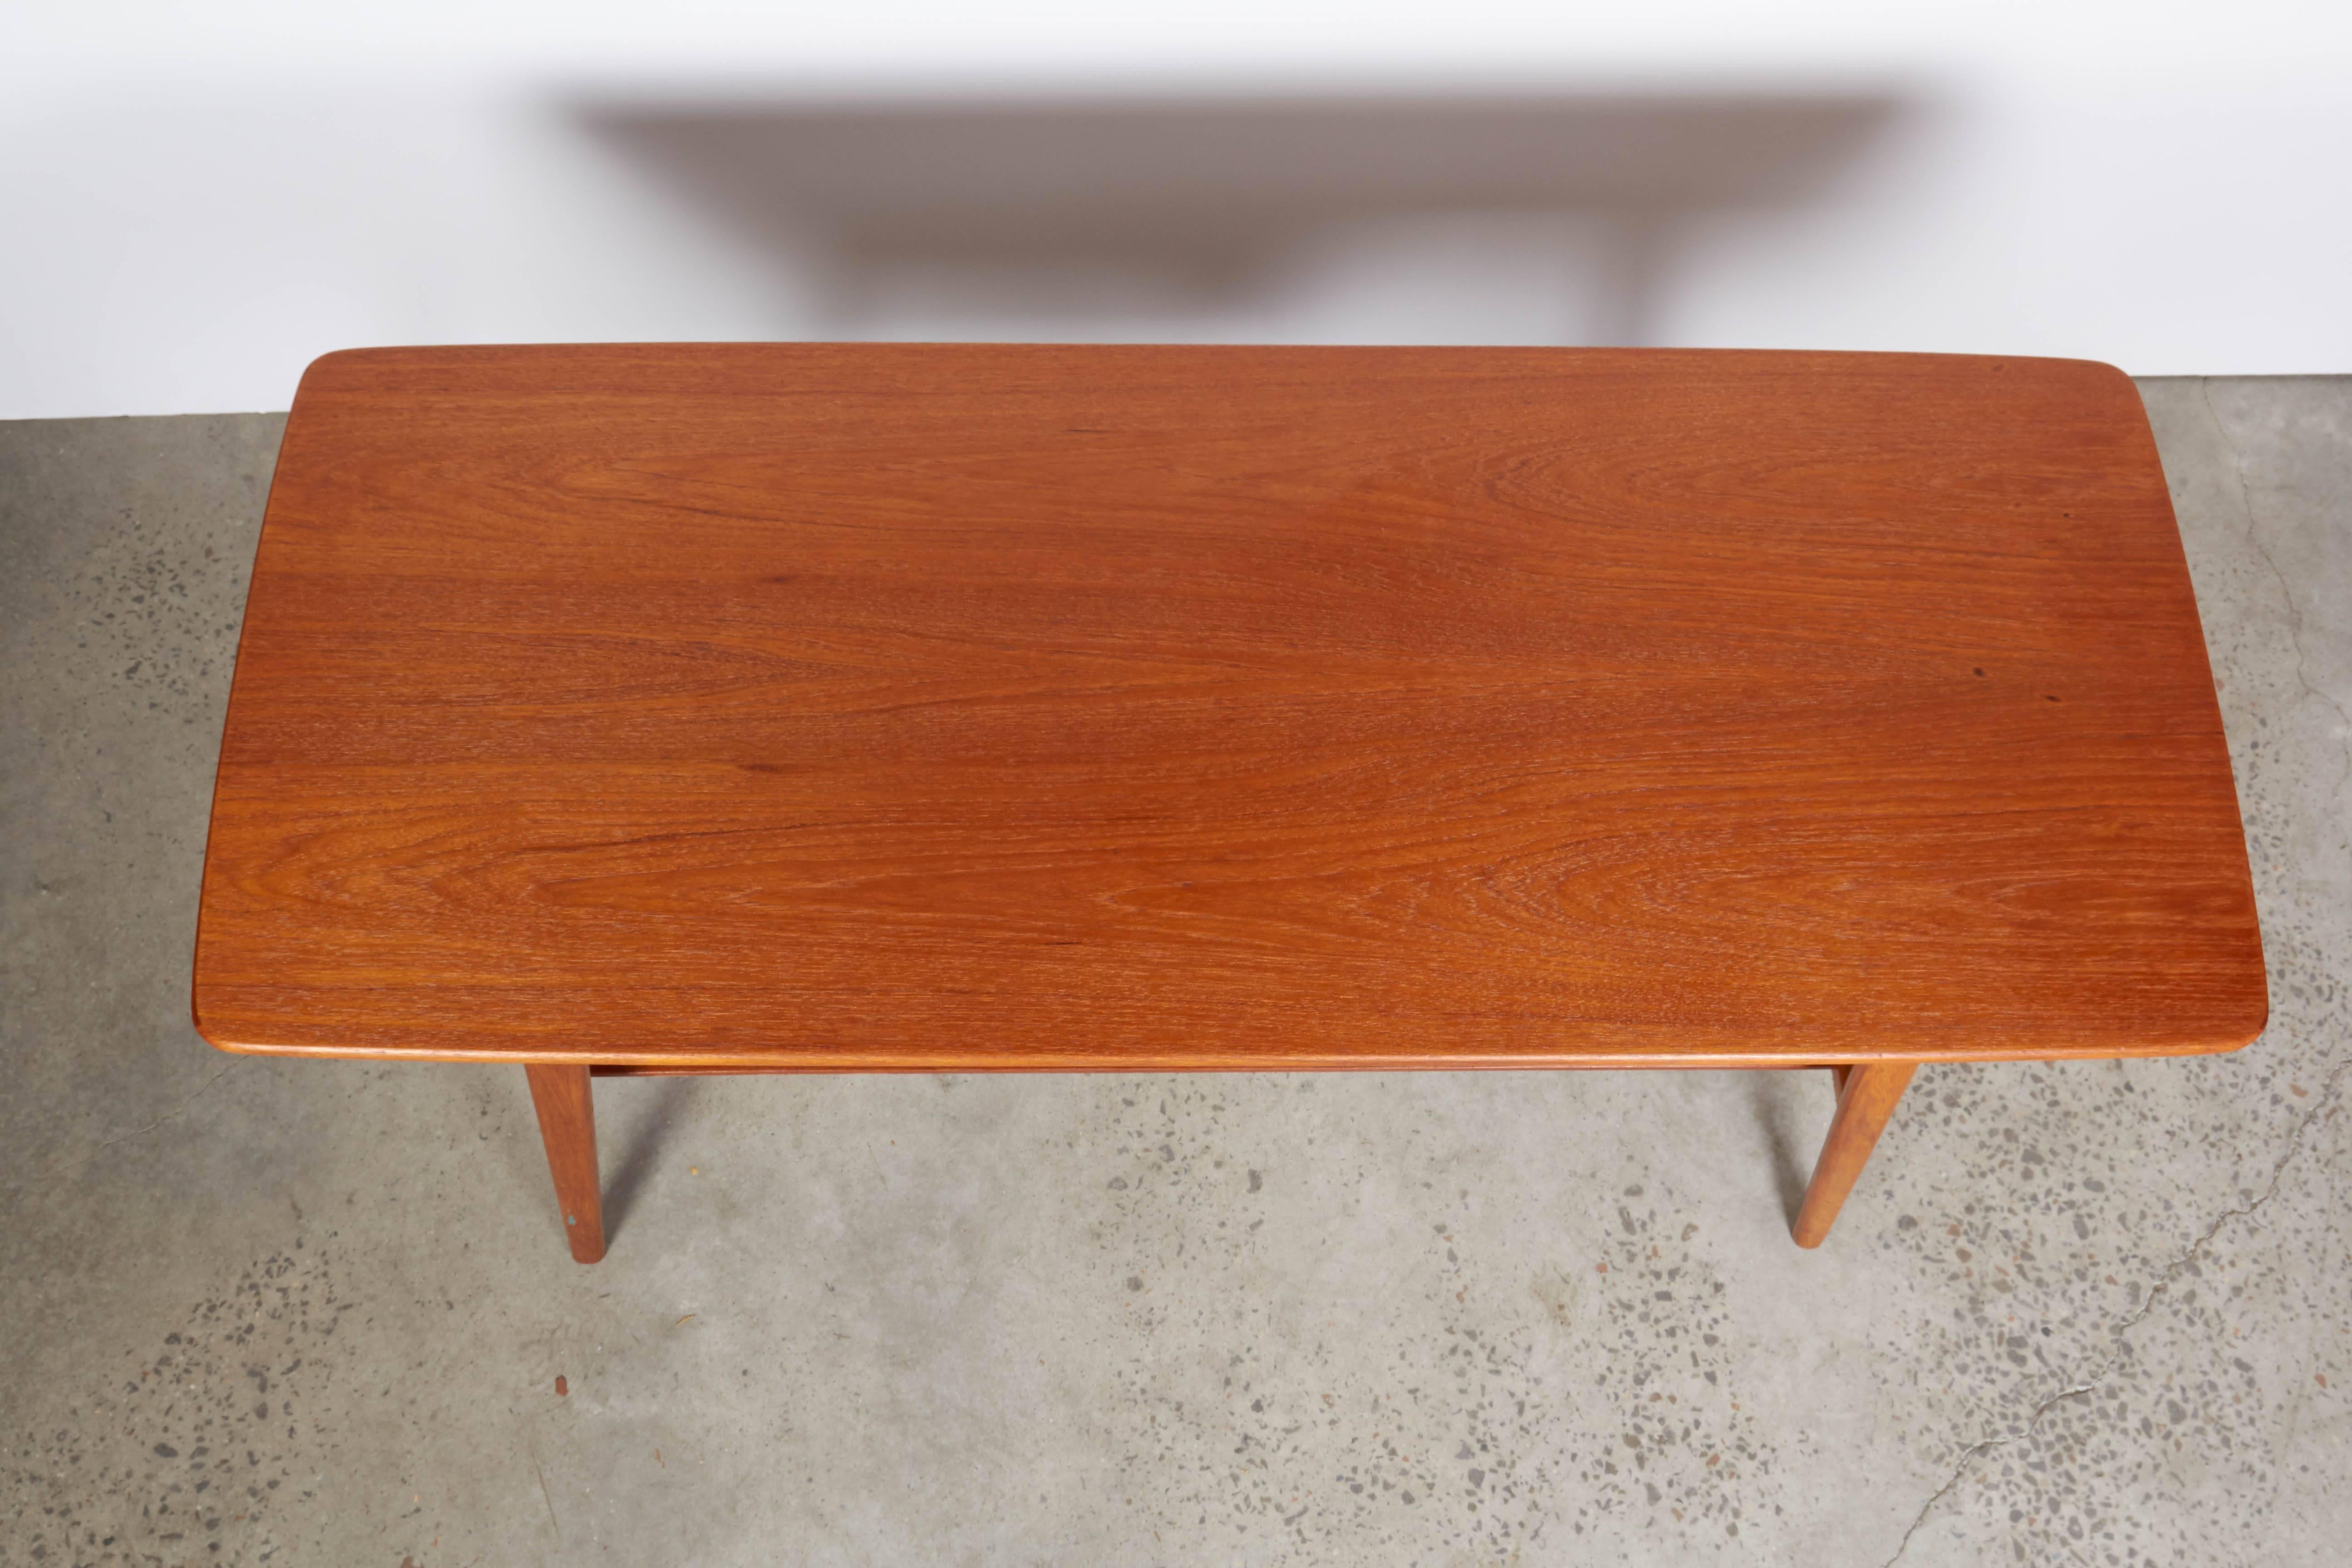 Vintage 1950s Teak Coffee Table with Sewing Compartments 

This Danish teak coffee table is in excellent condition and is so cool. The sewing compartments add an elegance that only the Danish could provide. You can use the extra space for throw